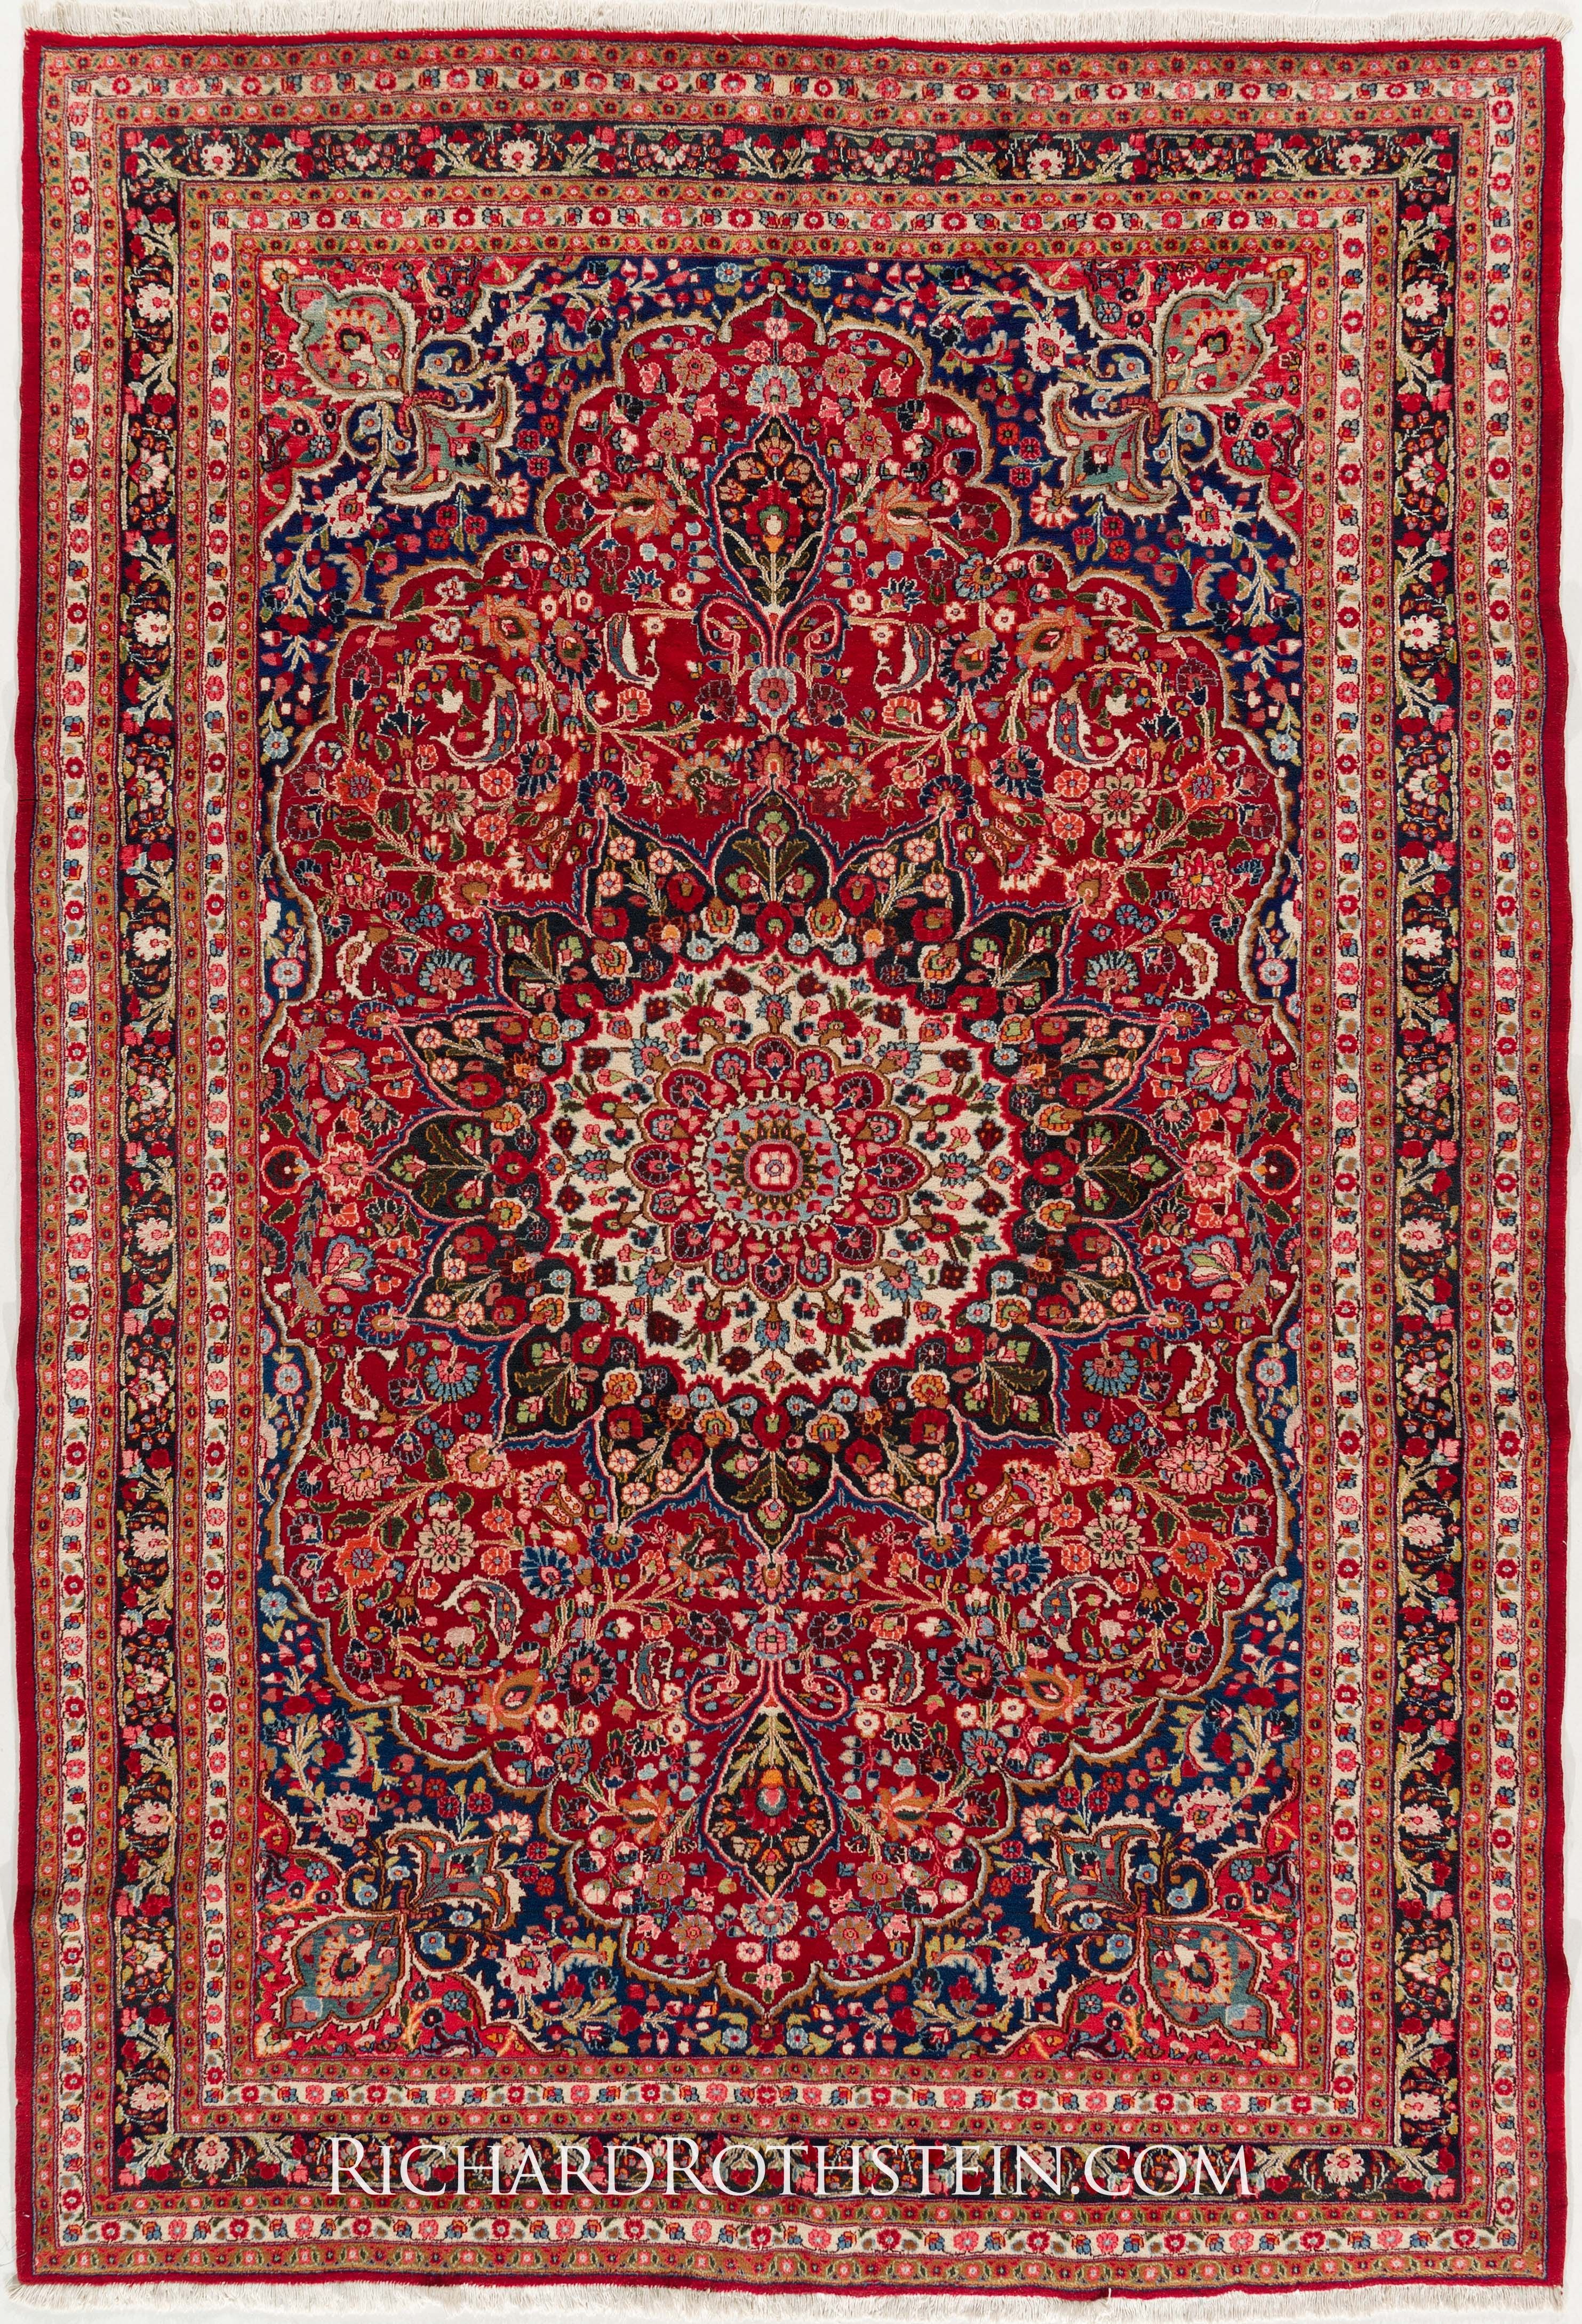 Oriental Rugs Artistry And Craftsman Is Just Beautiful Artwork Throughout Oriental Persian Rugs (View 8 of 15)